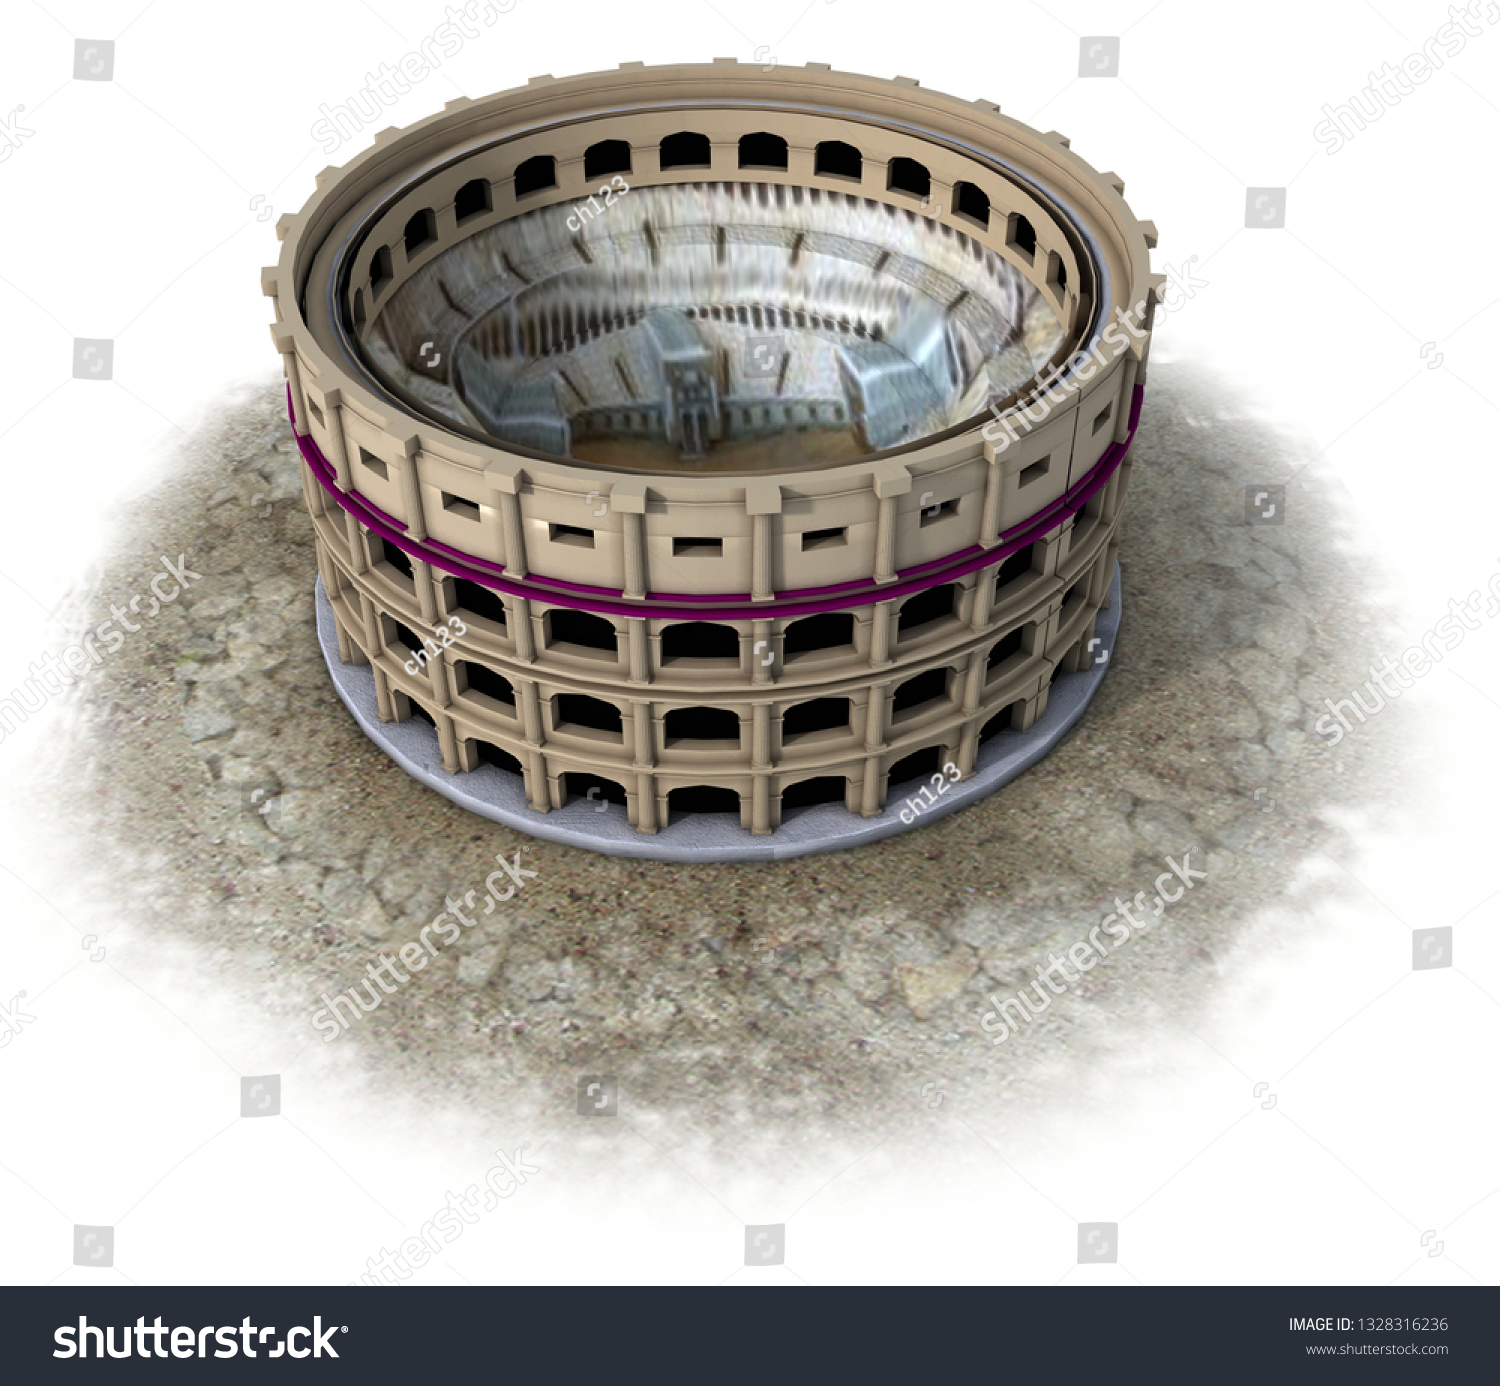 Colosseum Amphitheater Medieval Building 3d Visualization のイラスト素材 1328316236